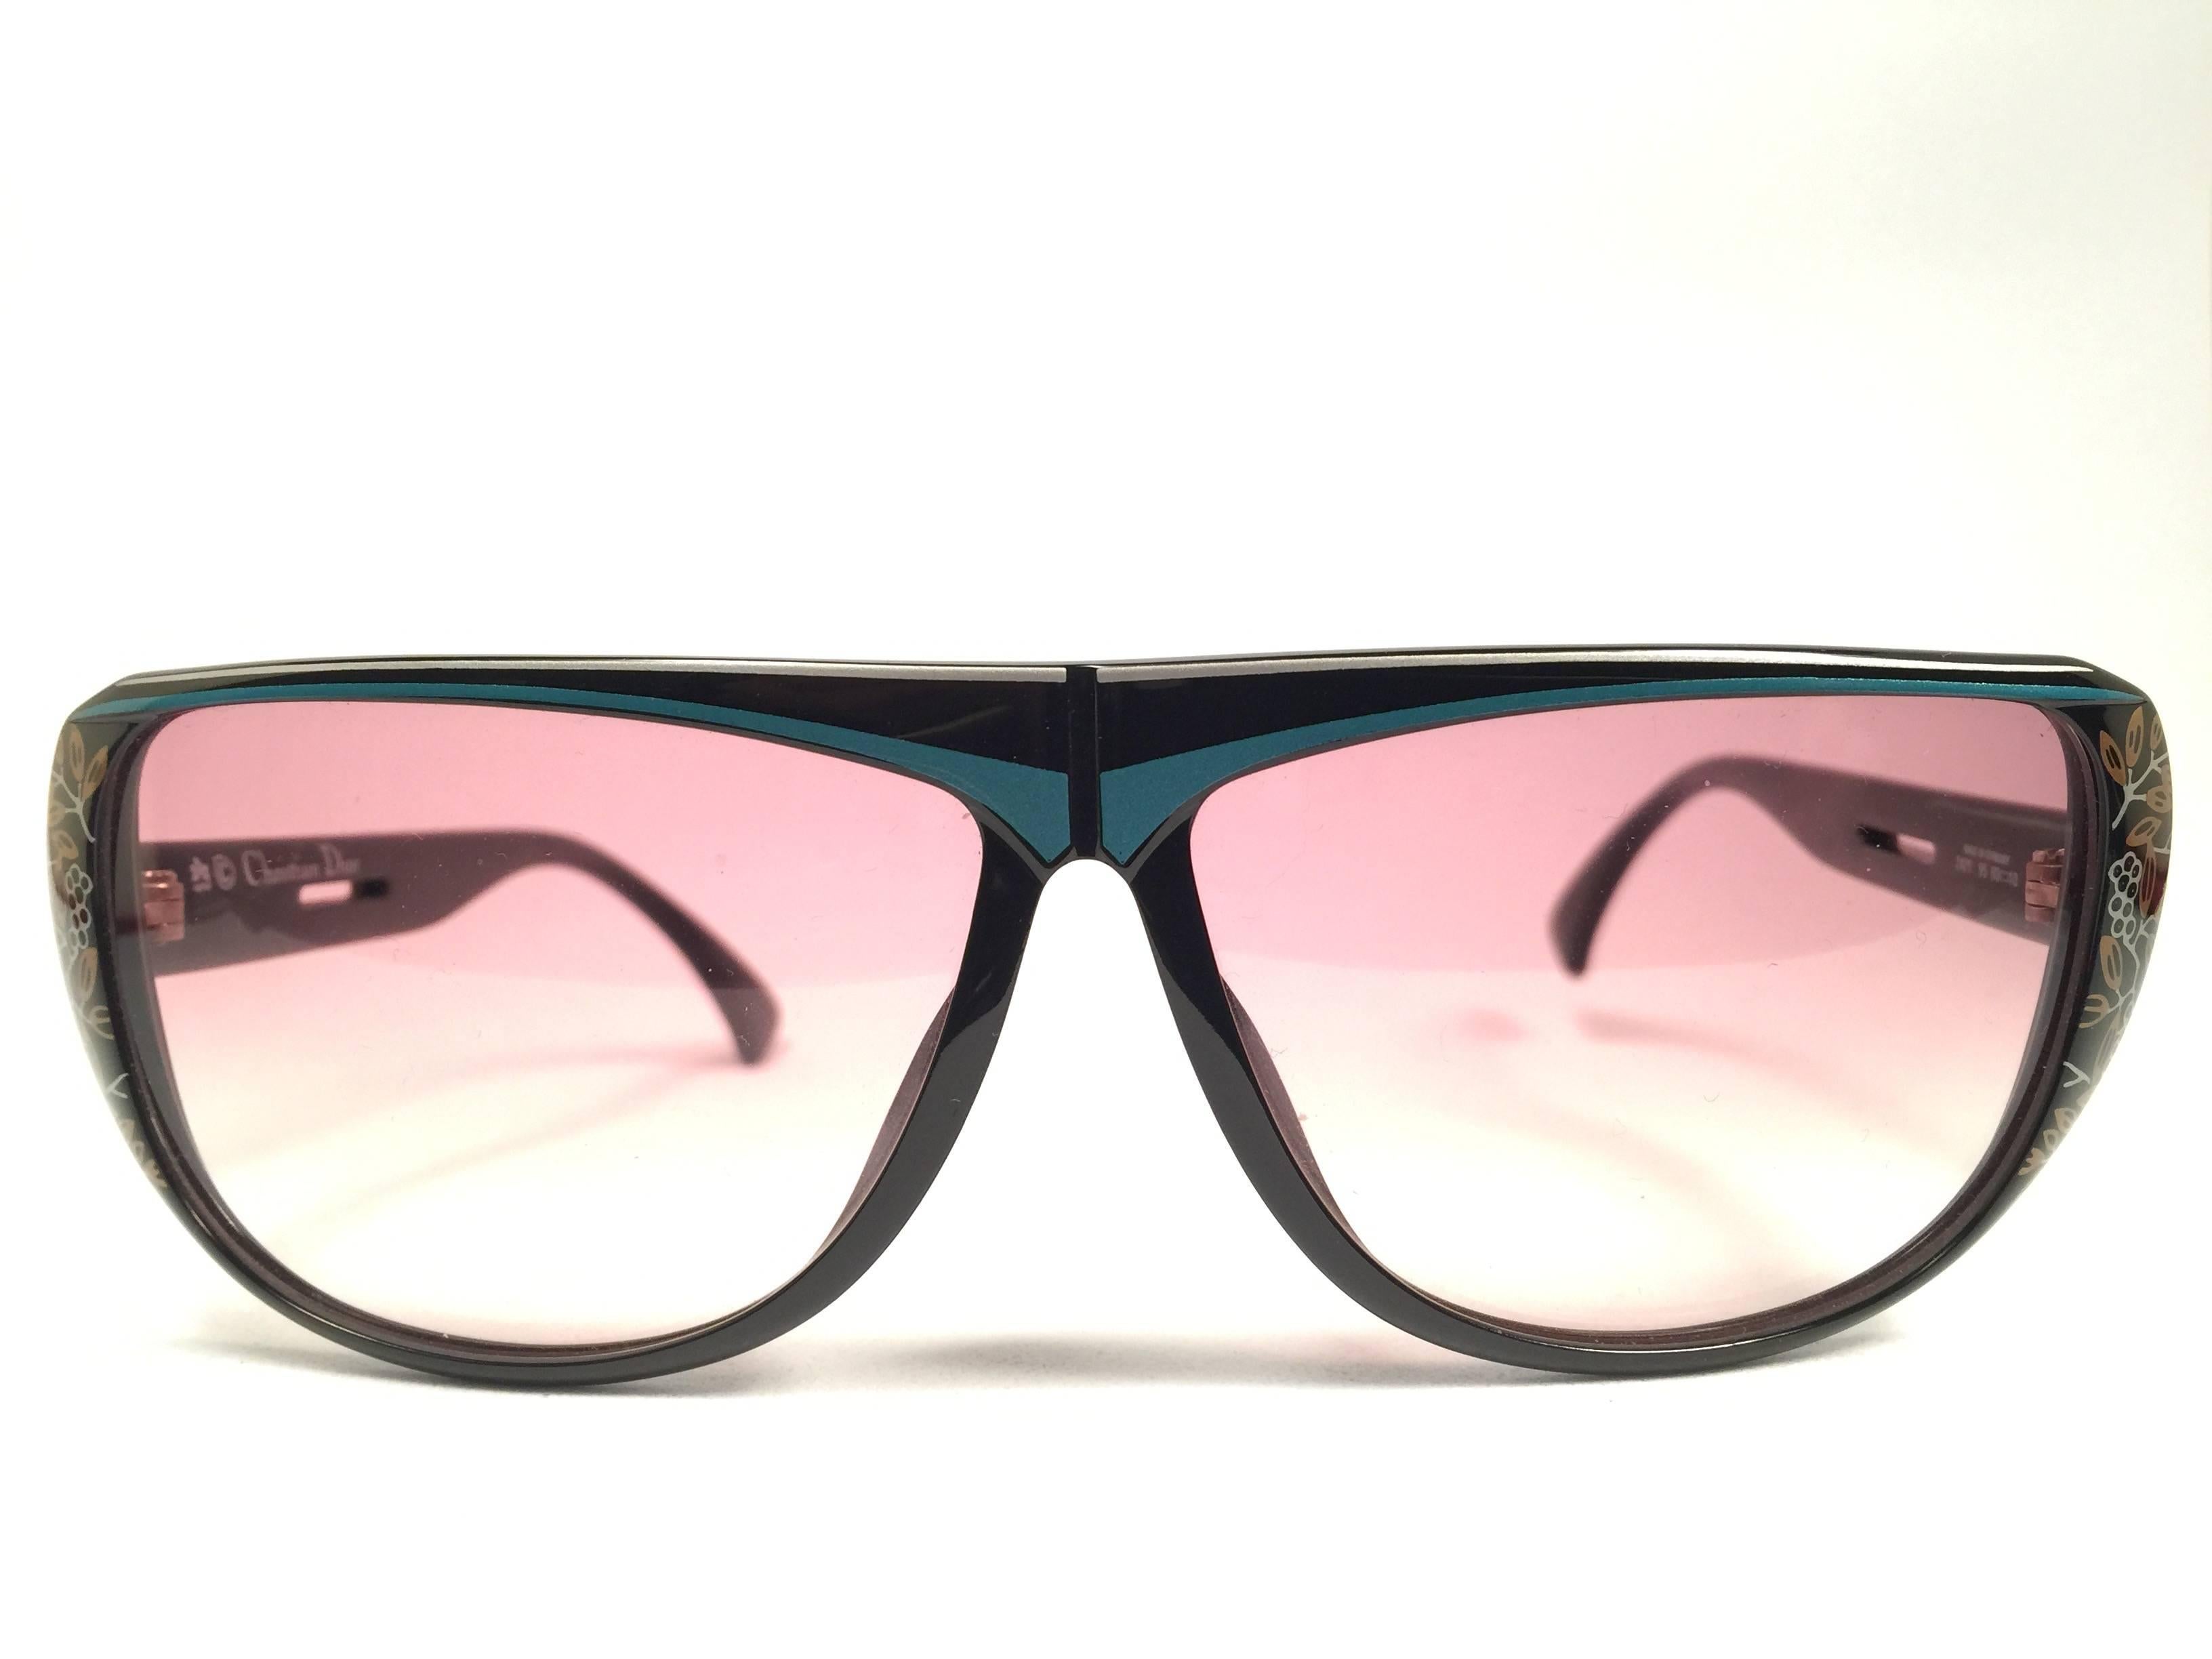 Mint Vintage Christian Dior 2421 black with blue and flower details 1980's frame with spotless lenses.   
Made in Germany.  

Comes with its original silver Christian Dior Lunettes sleeve.